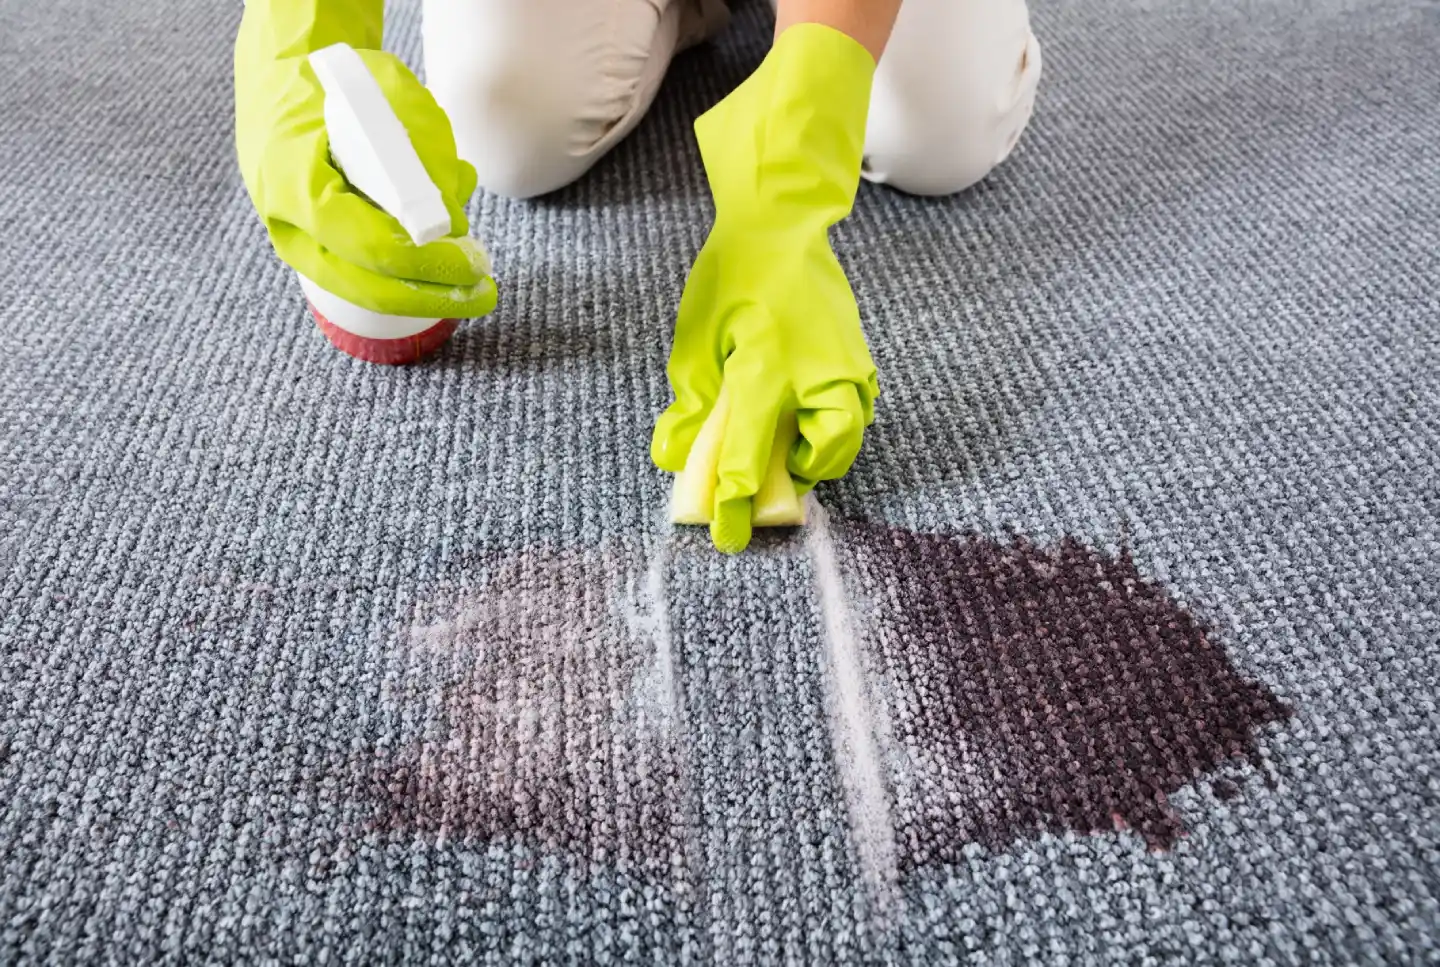 How to remove and clean carpet stains